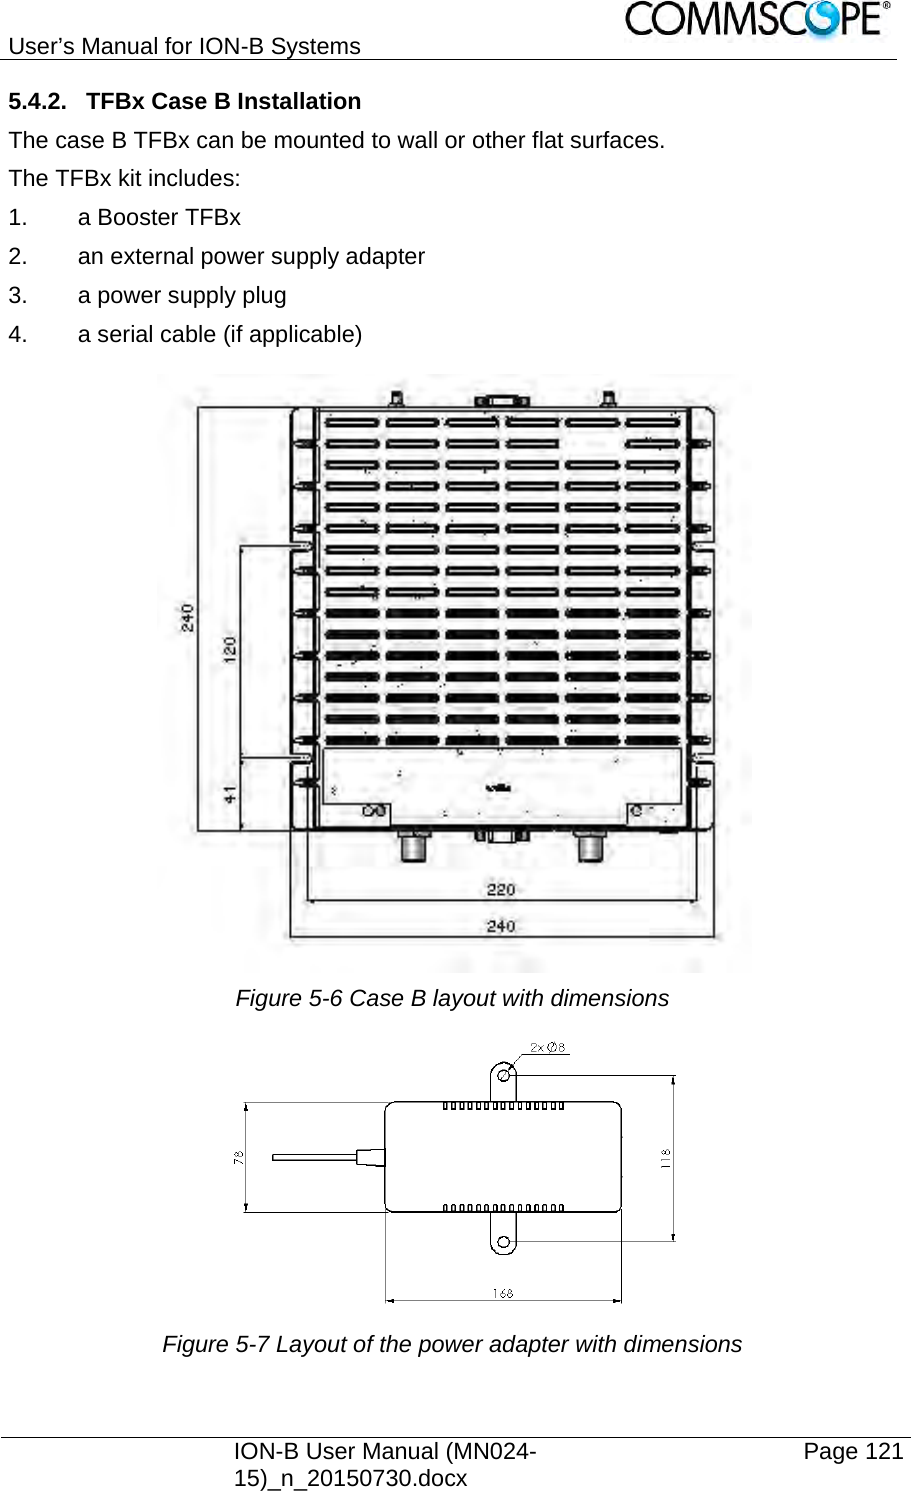 User’s Manual for ION-B Systems    ION-B User Manual (MN024-15)_n_20150730.docx  Page 121 5.4.2.  TFBx Case B Installation The case B TFBx can be mounted to wall or other flat surfaces. The TFBx kit includes: 1.  a Booster TFBx 2.  an external power supply adapter 3.  a power supply plug 4.  a serial cable (if applicable)   Figure 5-6 Case B layout with dimensions  Figure 5-7 Layout of the power adapter with dimensions 